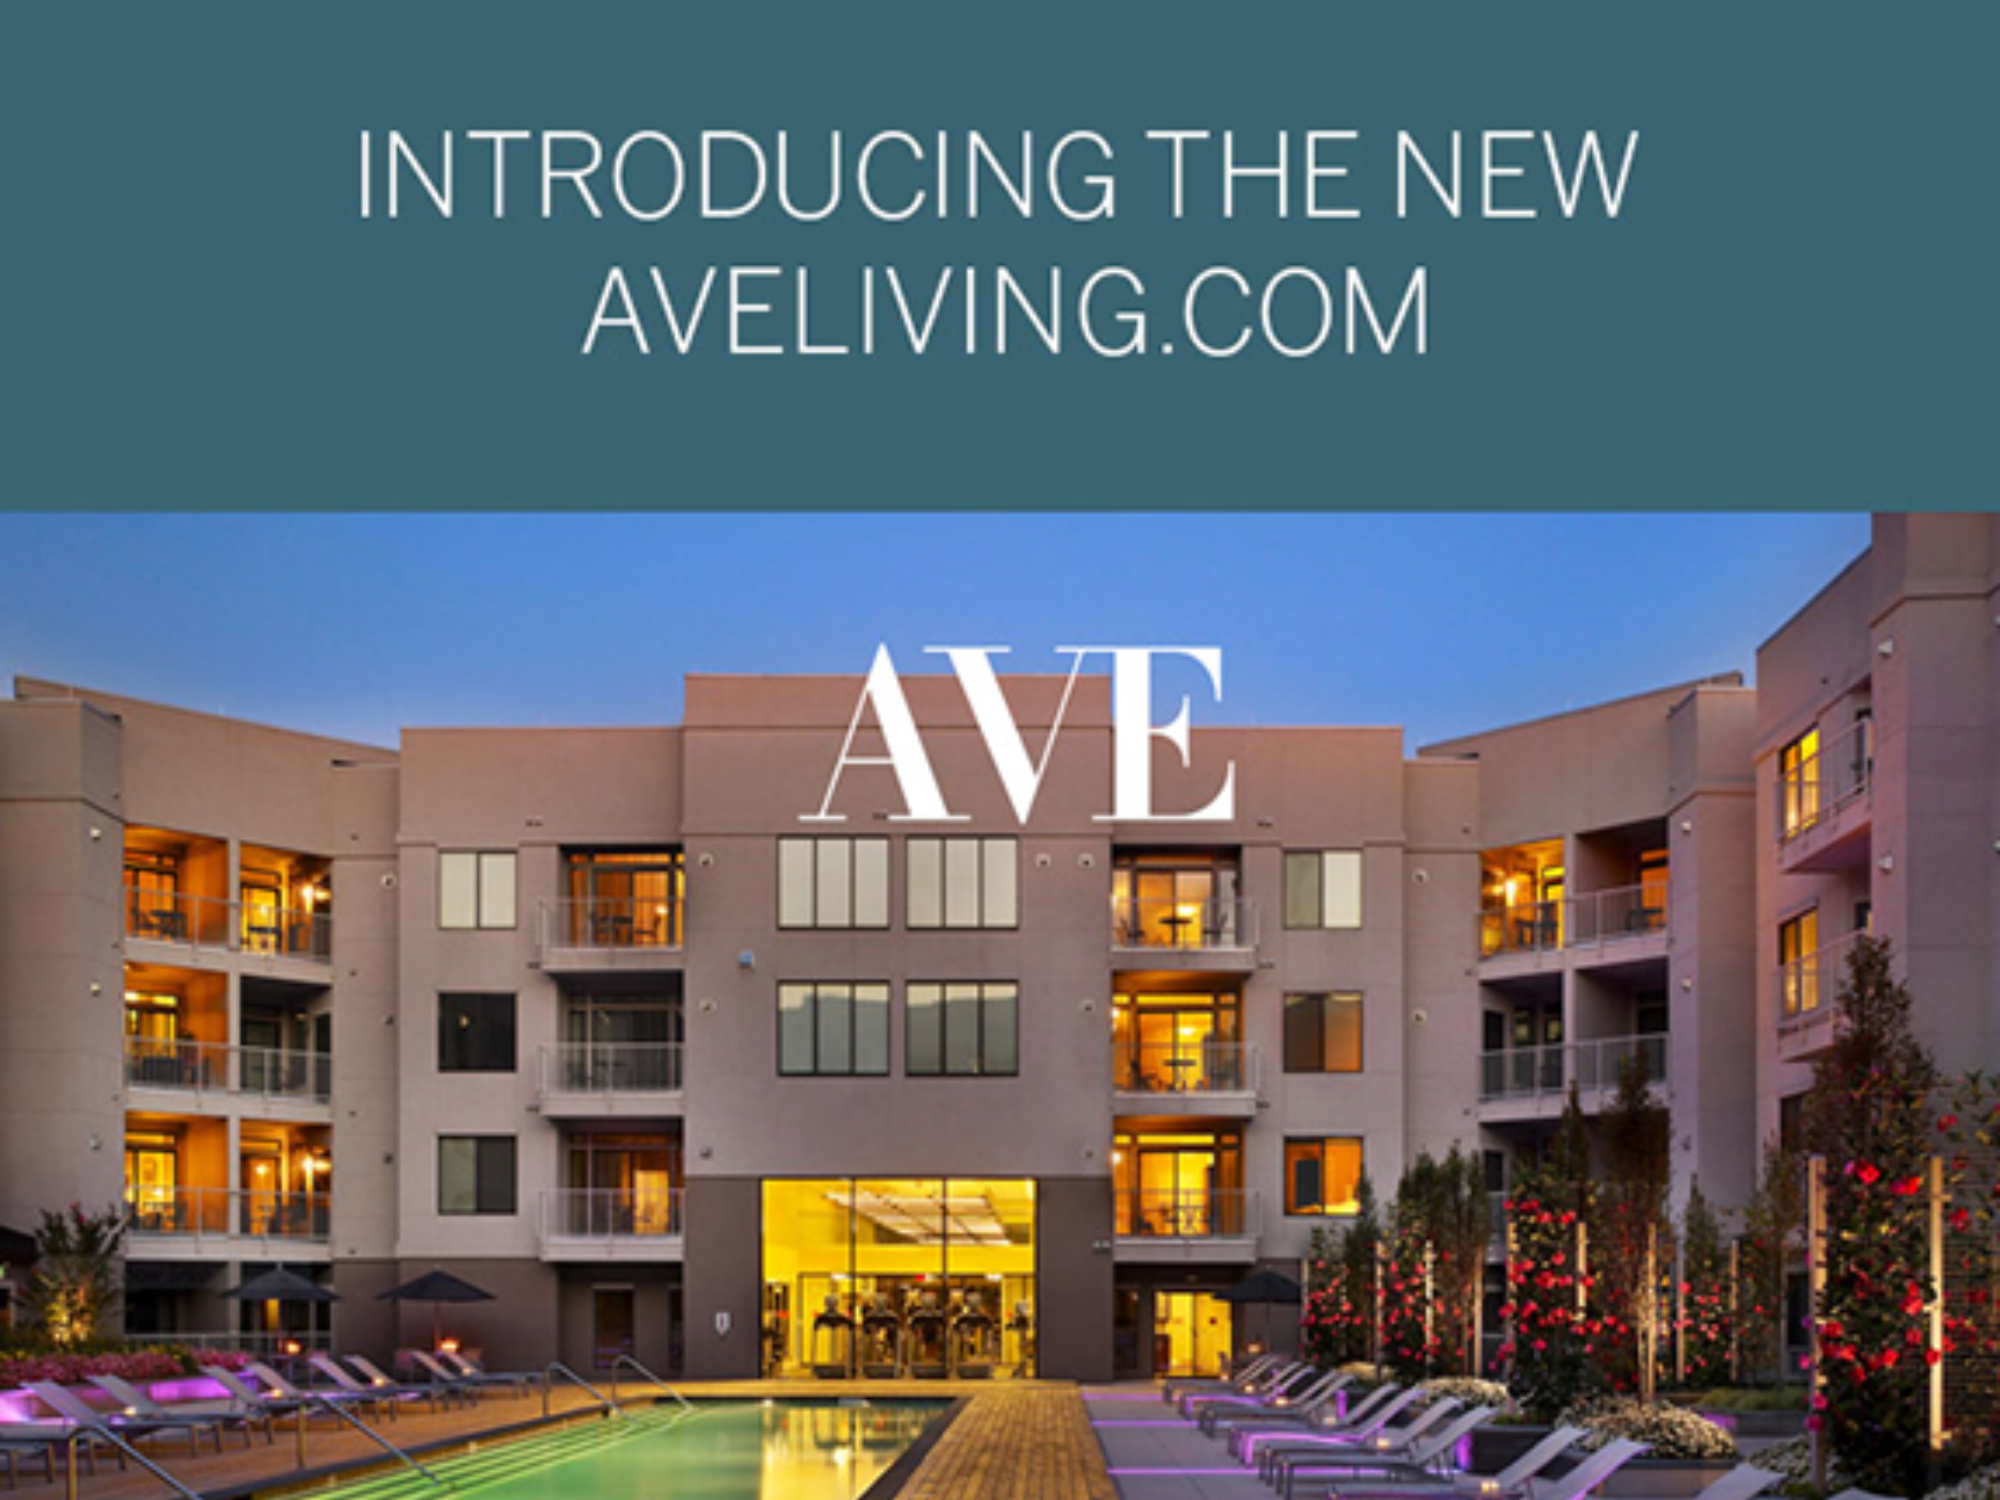 AVE LAUNCHES REDESIGNED WEBSITE